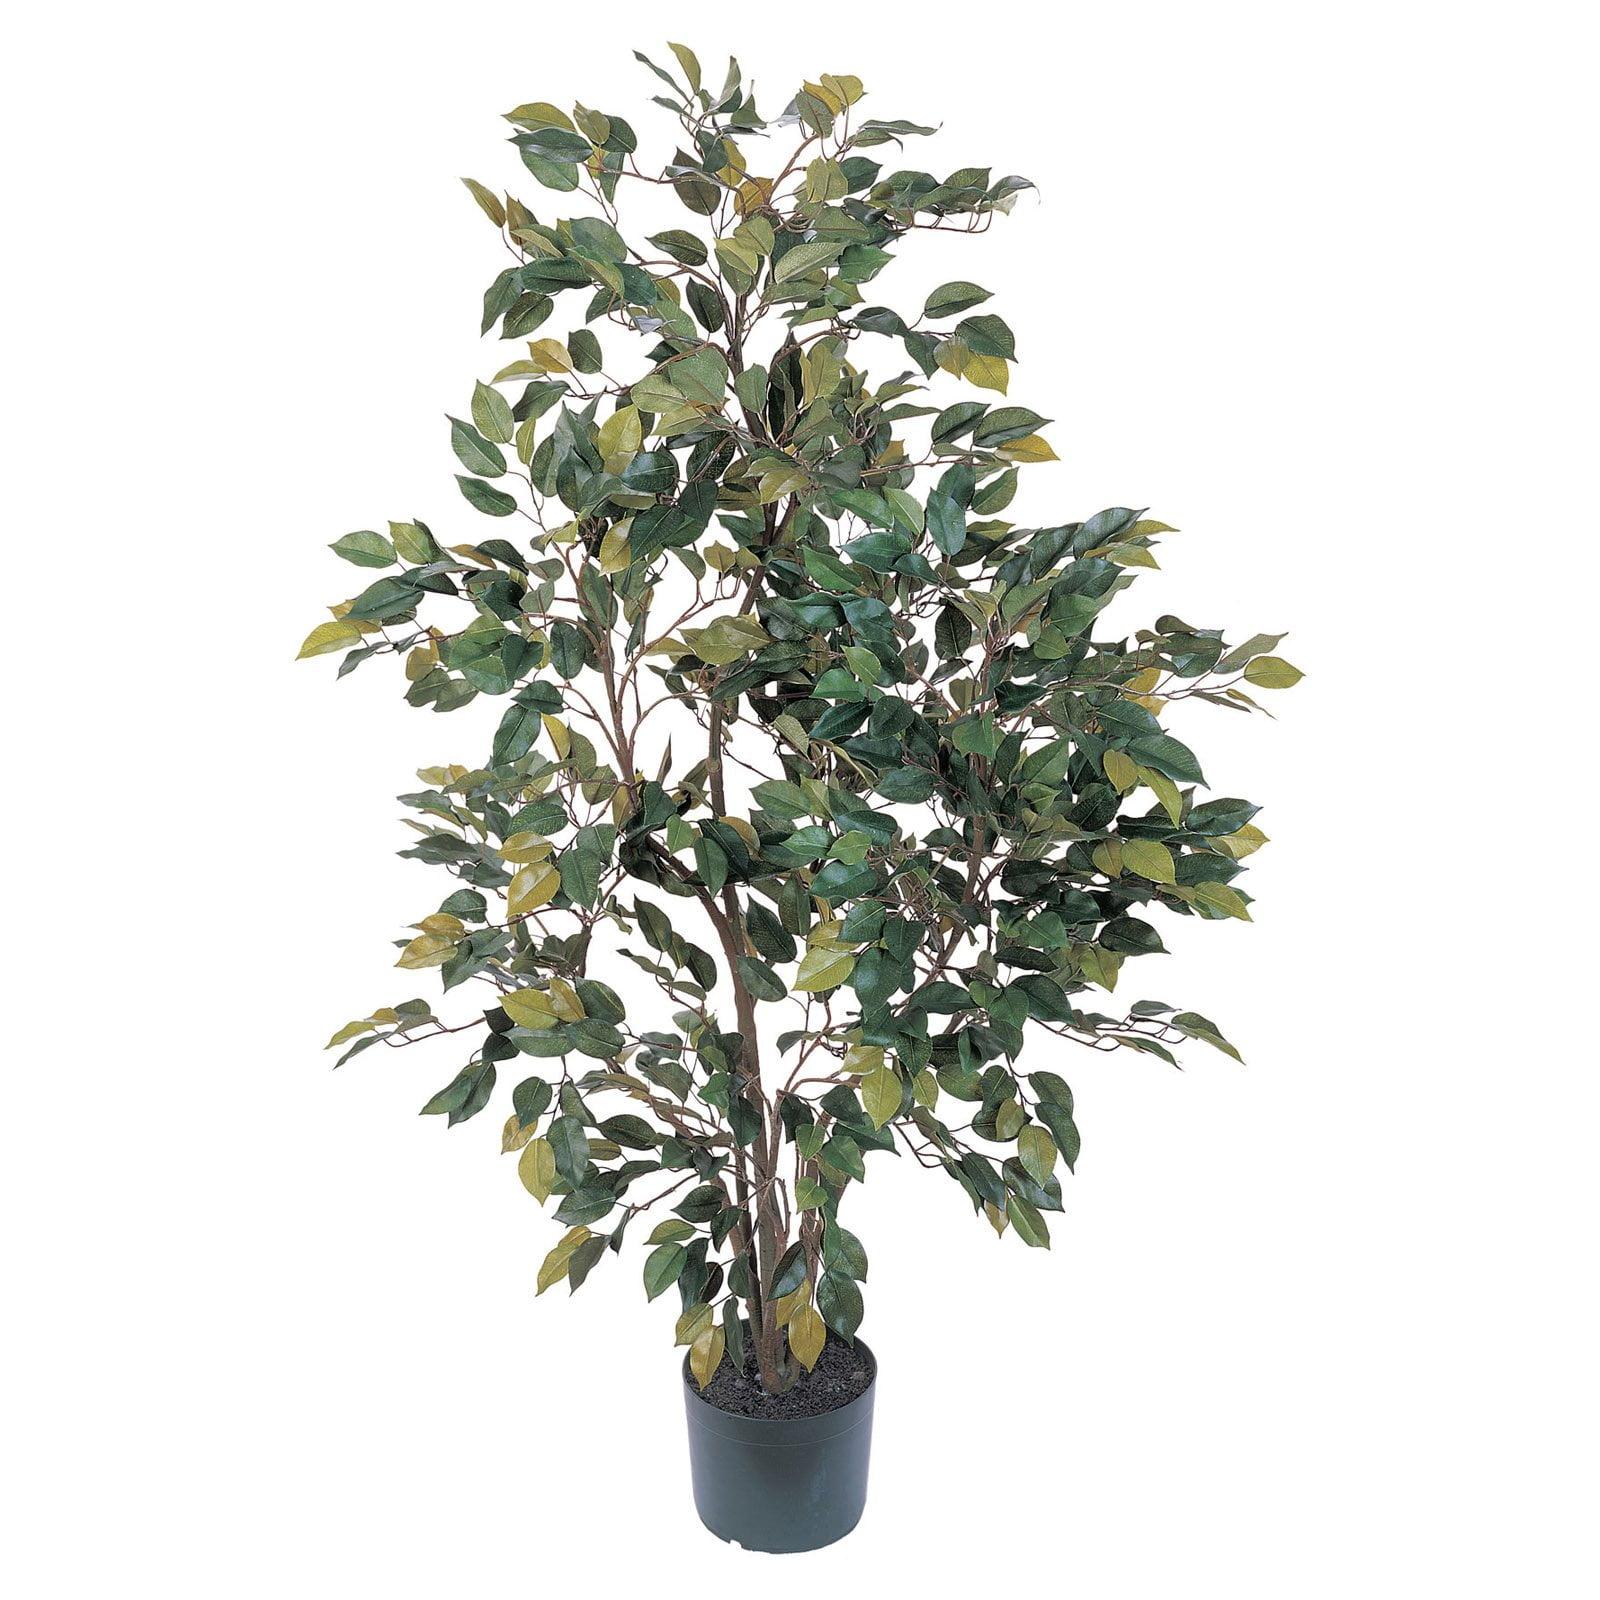 Lush Green Ficus 4ft Silk Floor Plant in Pot with Matted Moss